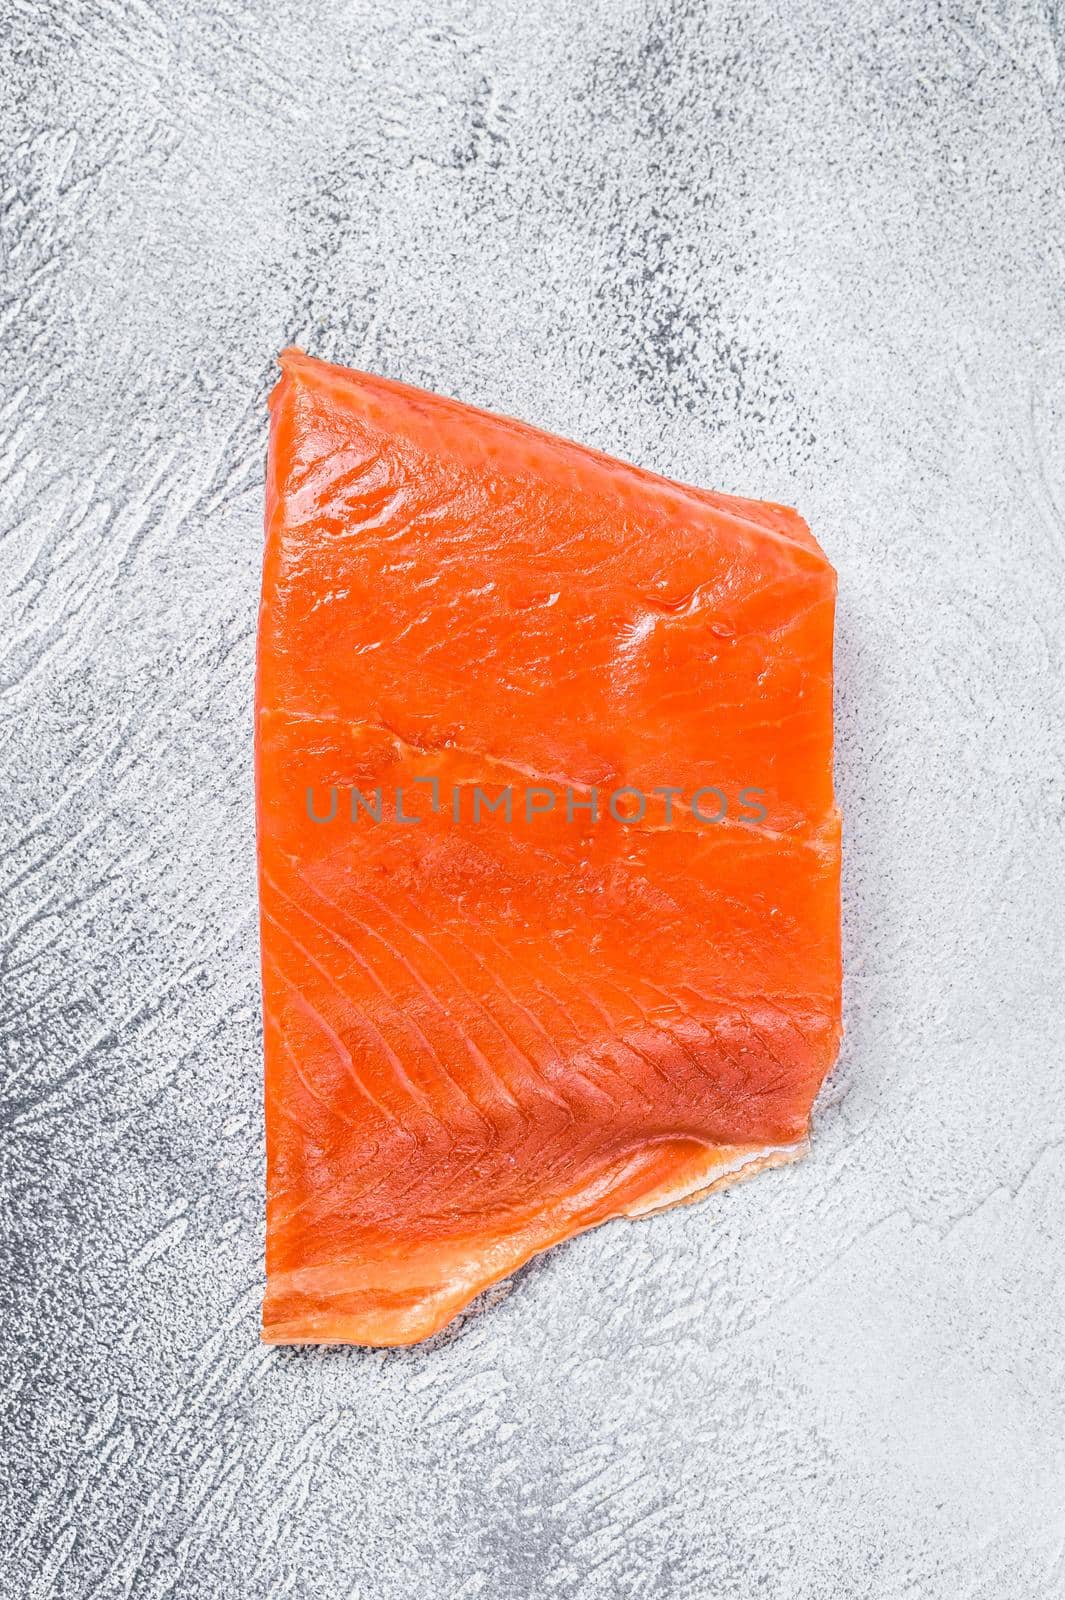 Smoked salmon fillet on a wooden table. White background. Top view by Composter